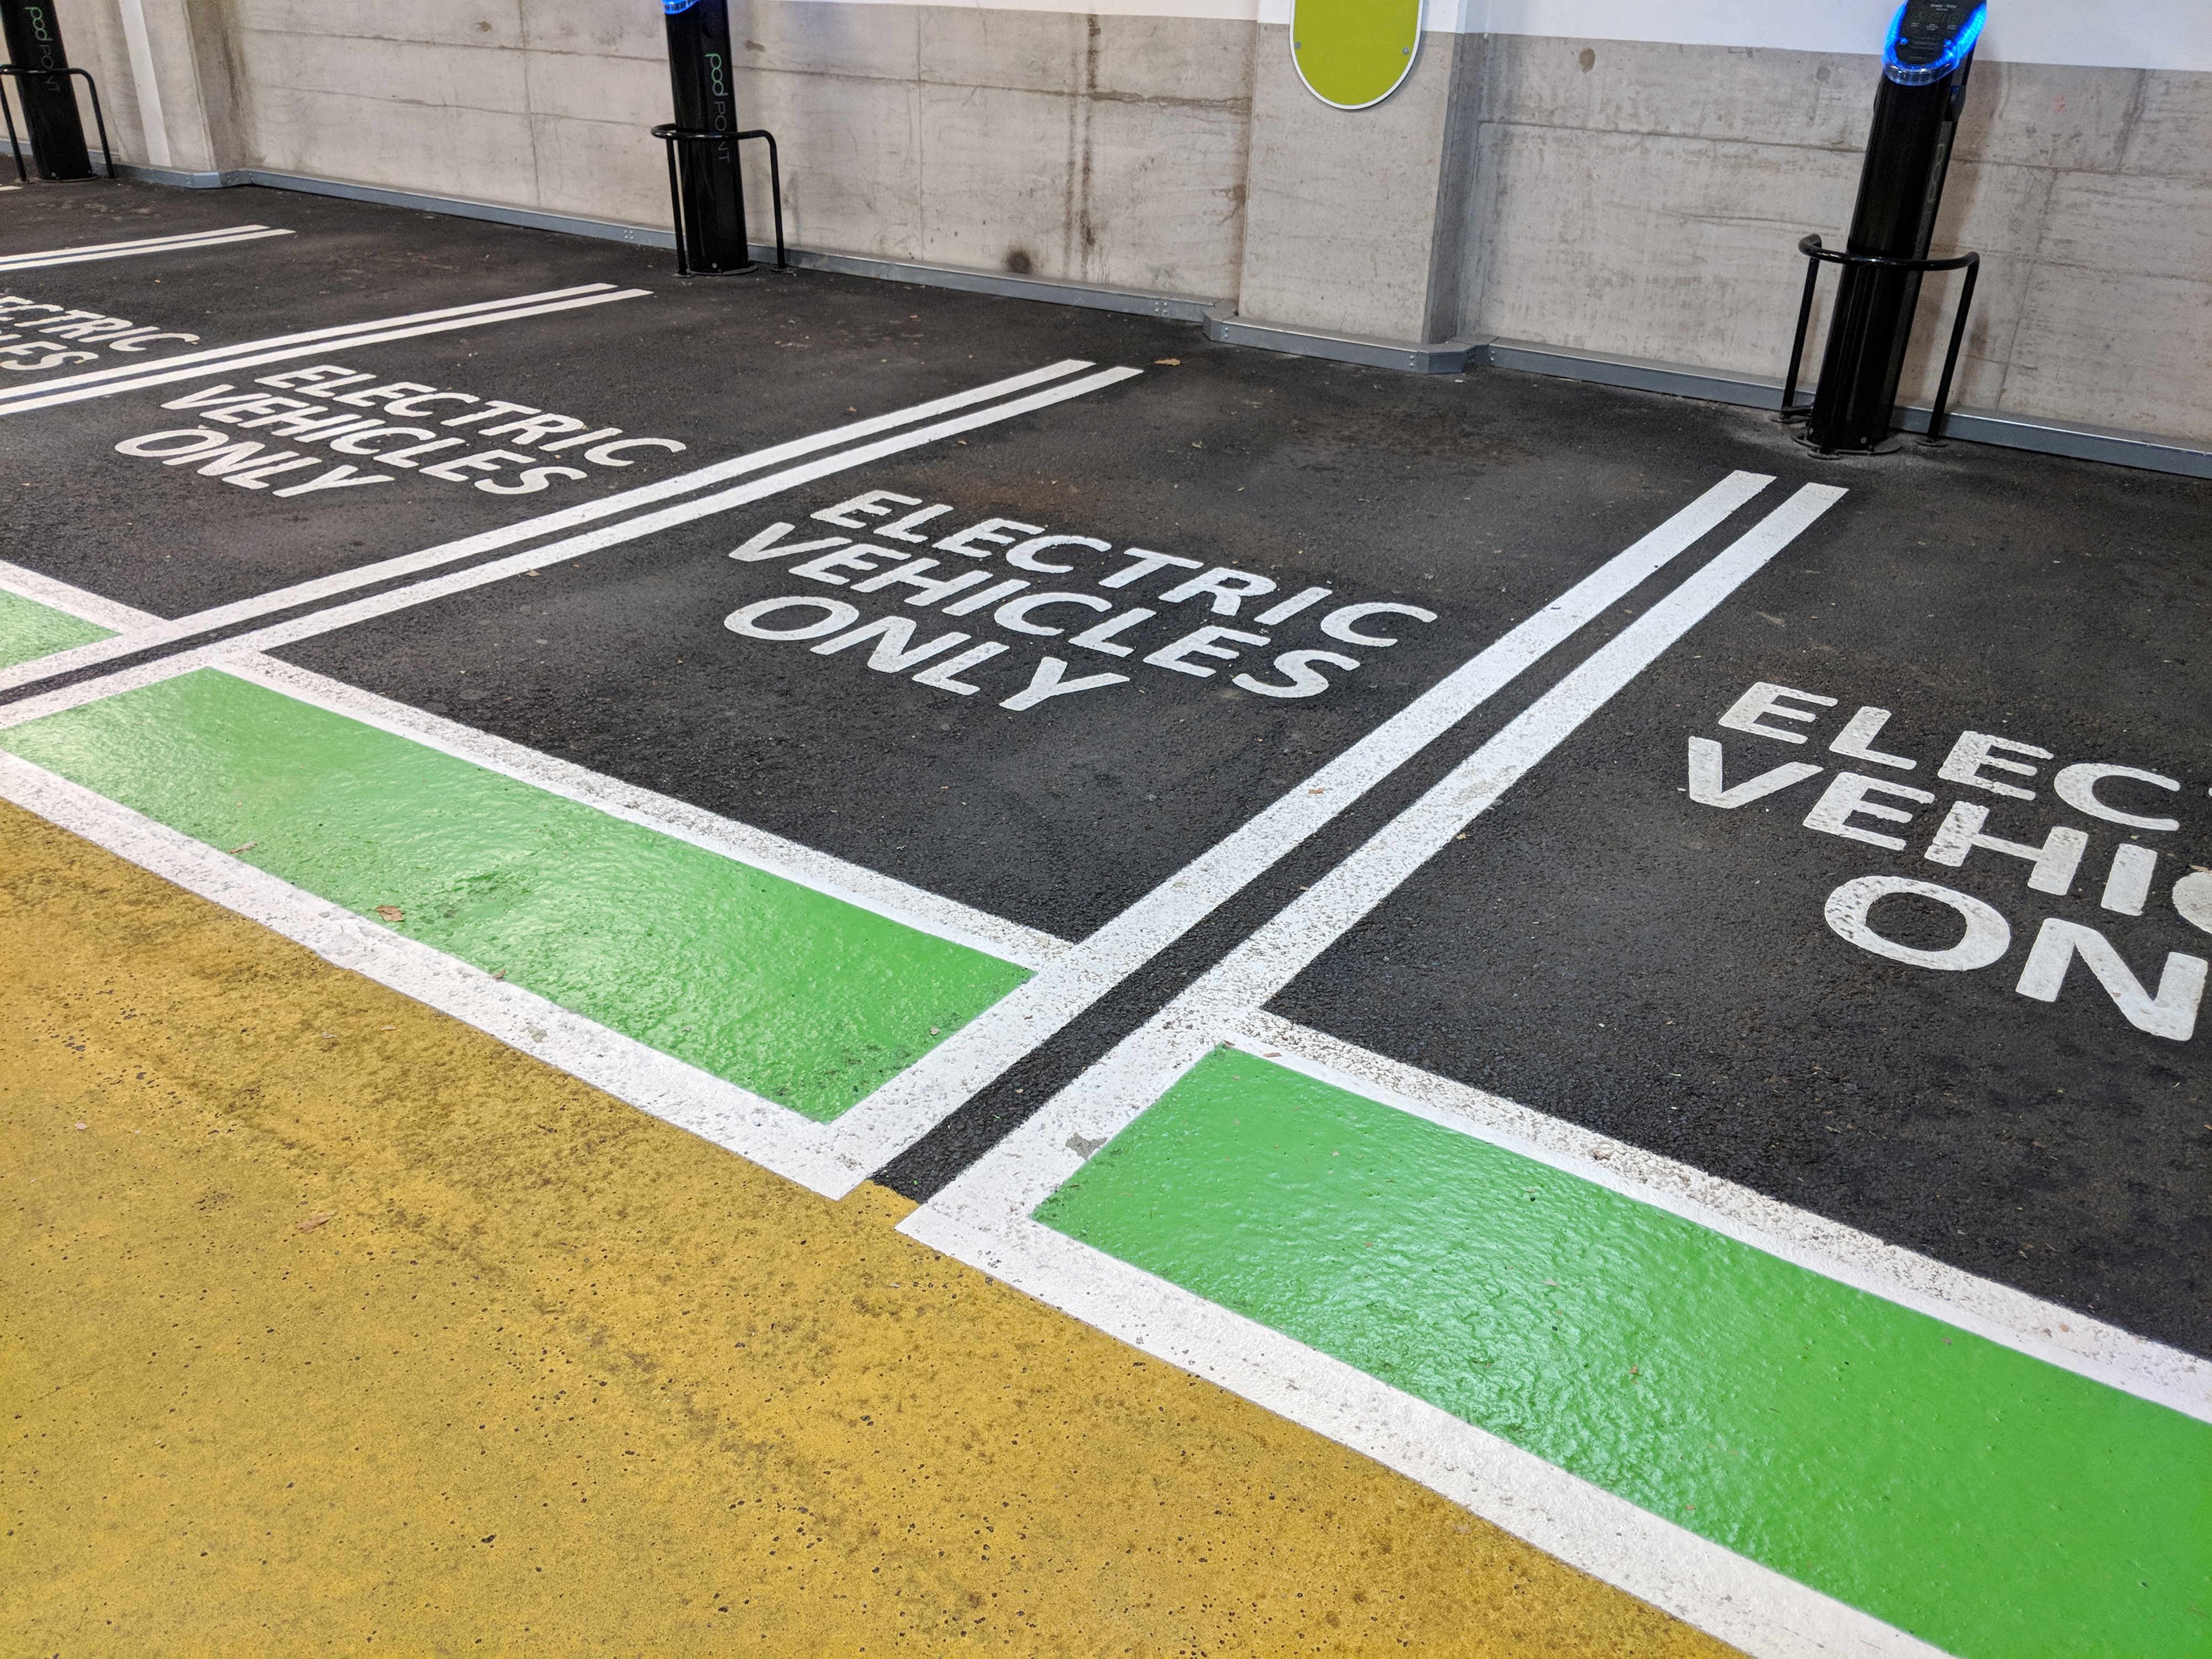 Electric vehicle charging only spaces in a car park